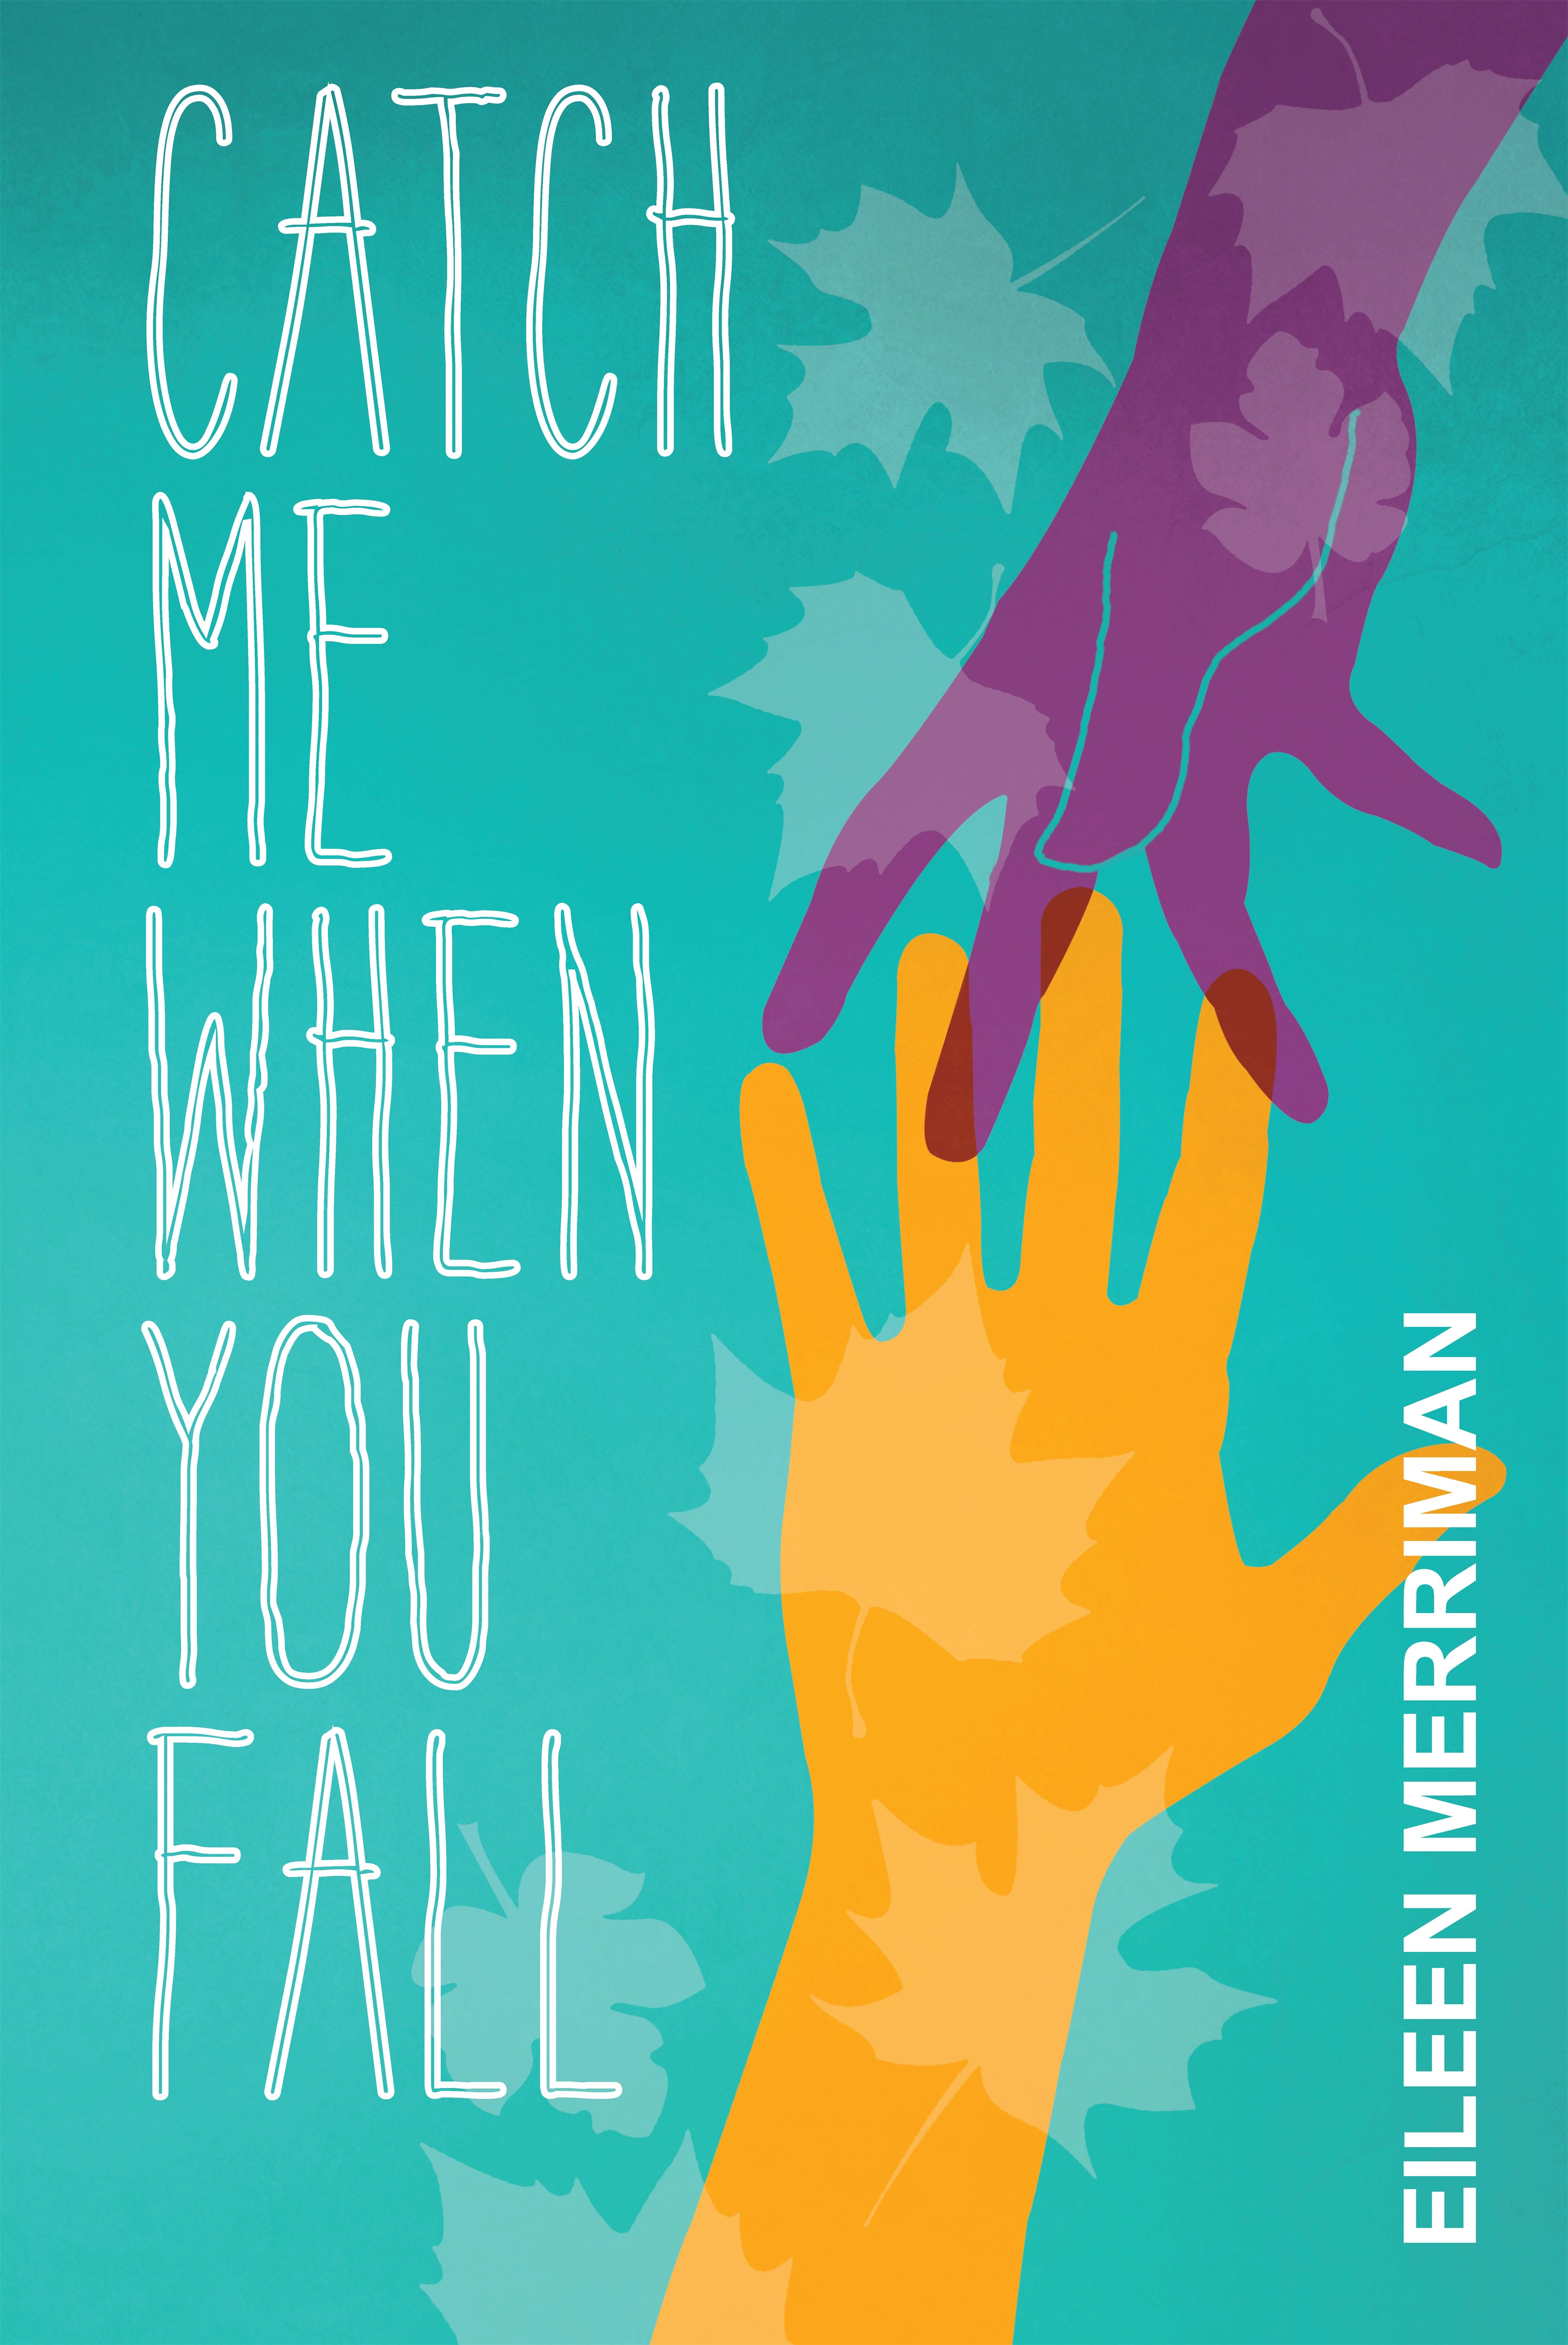 Catch Me When You Fall by Eileen Merriman - Penguin Books New Zealand